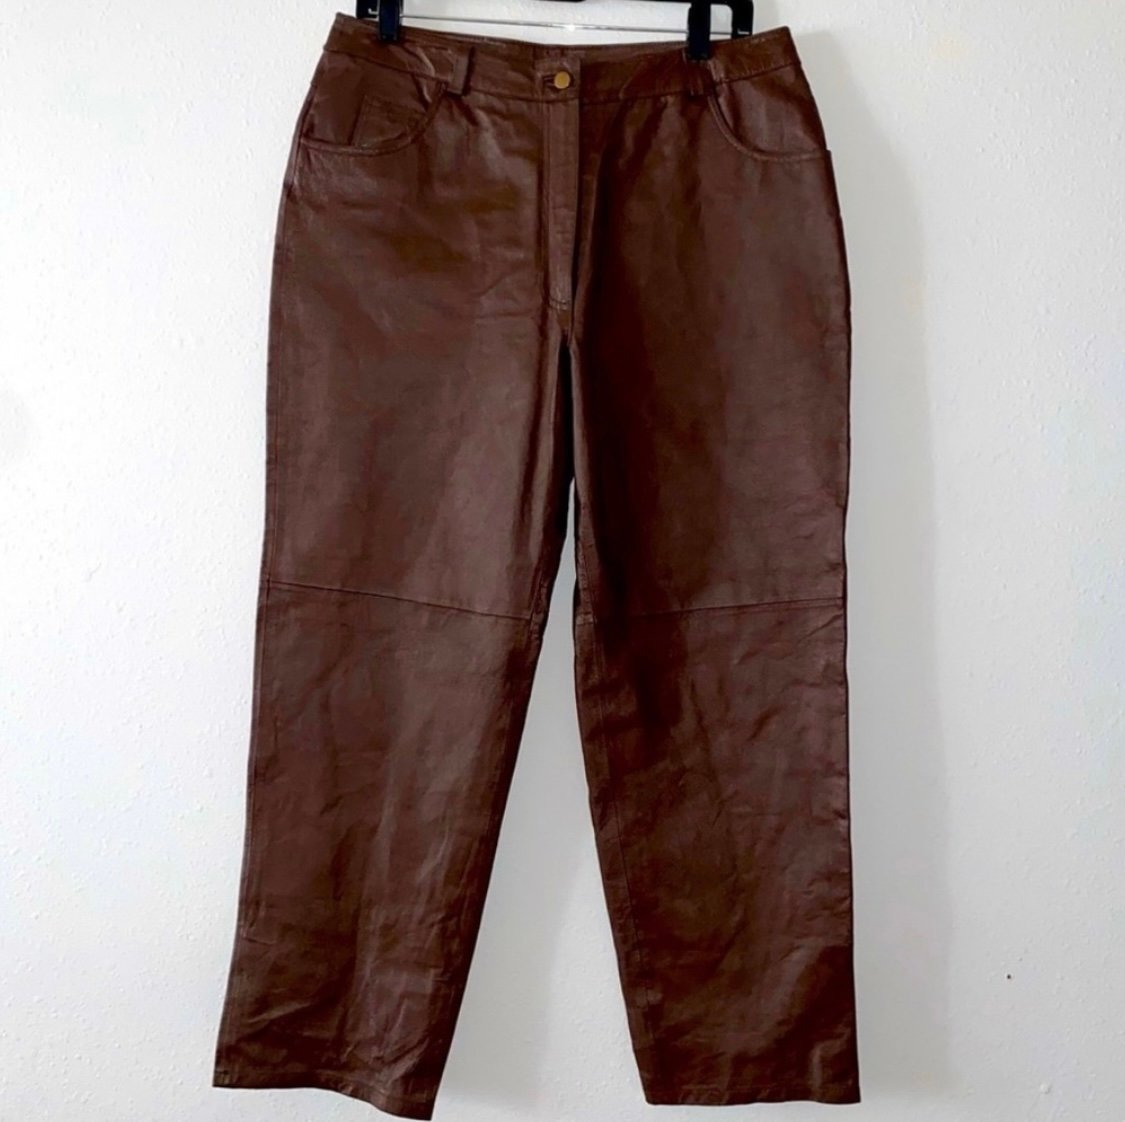 Wholesale price Pants lF6VXkv9c all for you